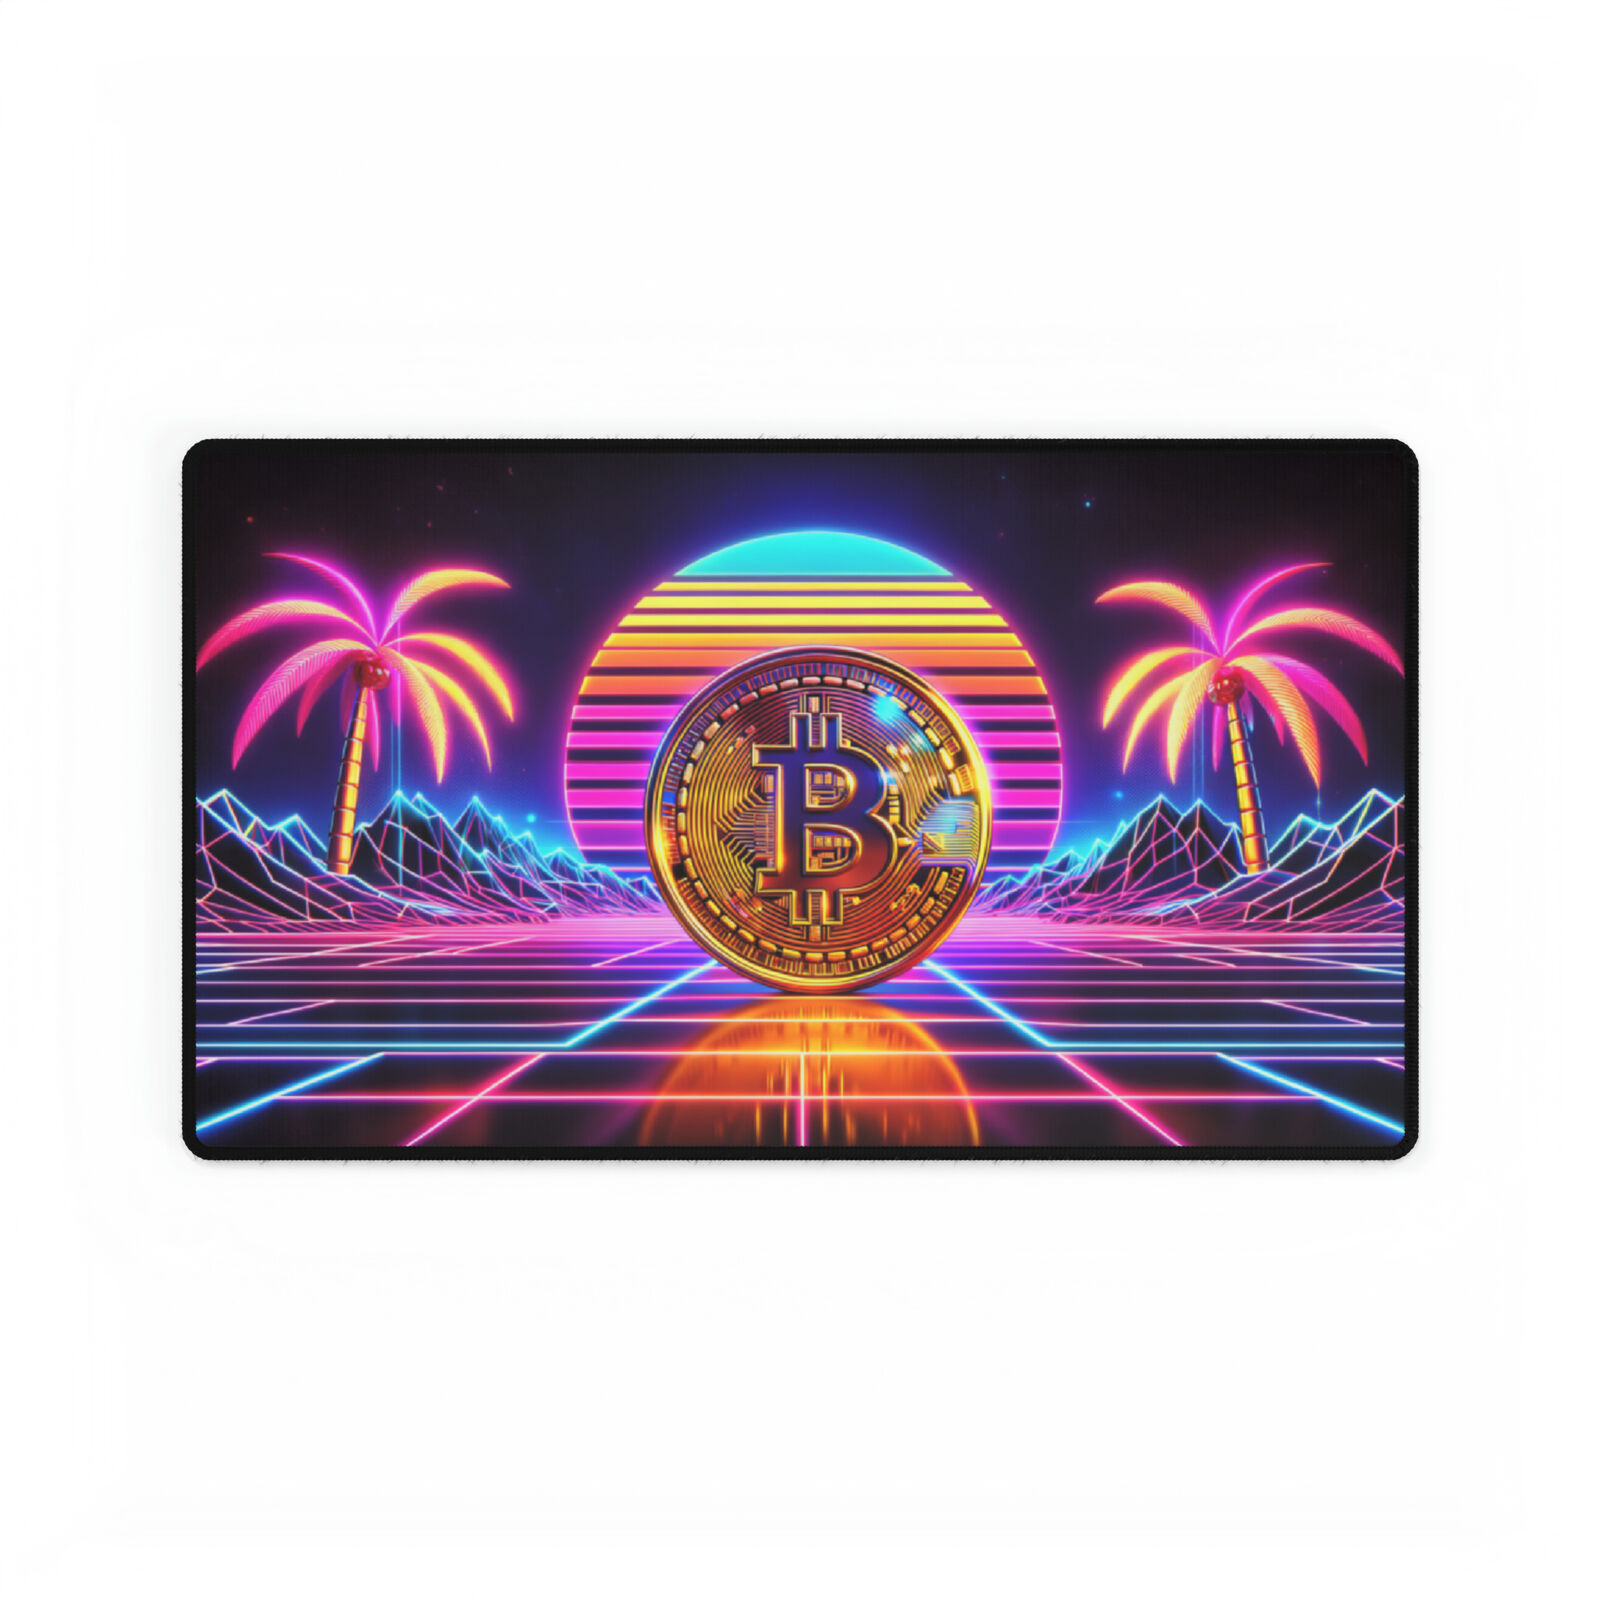 Bit coin Cryptocurrency Miami Cyberpunk style High Definition Desk Mat Mousepad